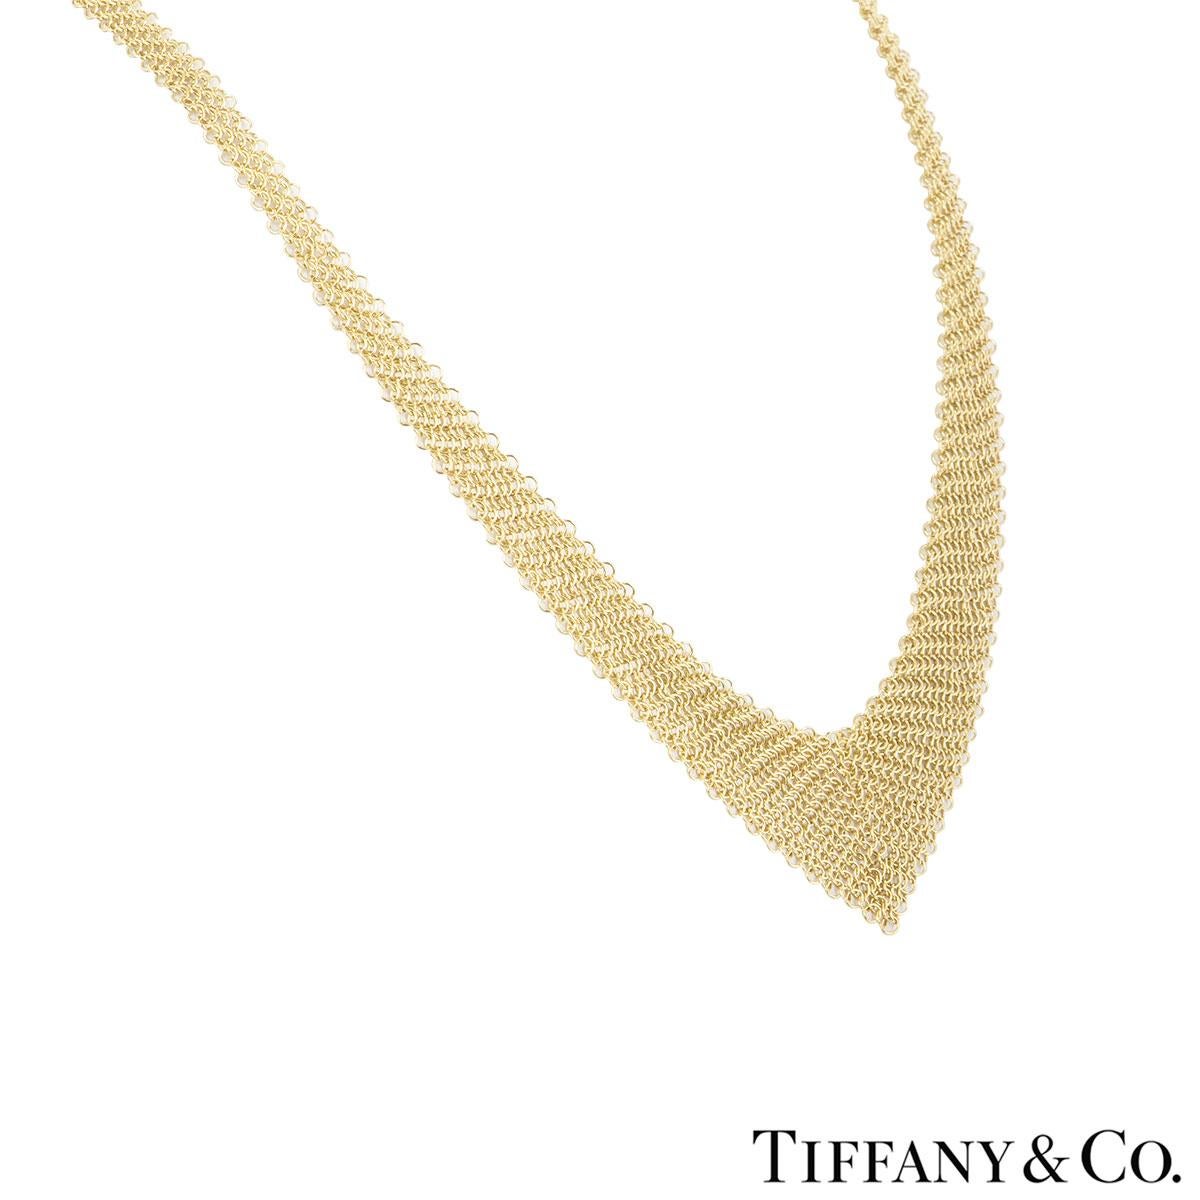 A stunning 18k yellow gold mesh necklace by Tiffany & Co. from the Elsa Peretti collection. The necklace is designed in the form of a bib which wraps around the neck and ties at the rear. The necklace has a gross weight of 31.90 grams.

The necklace